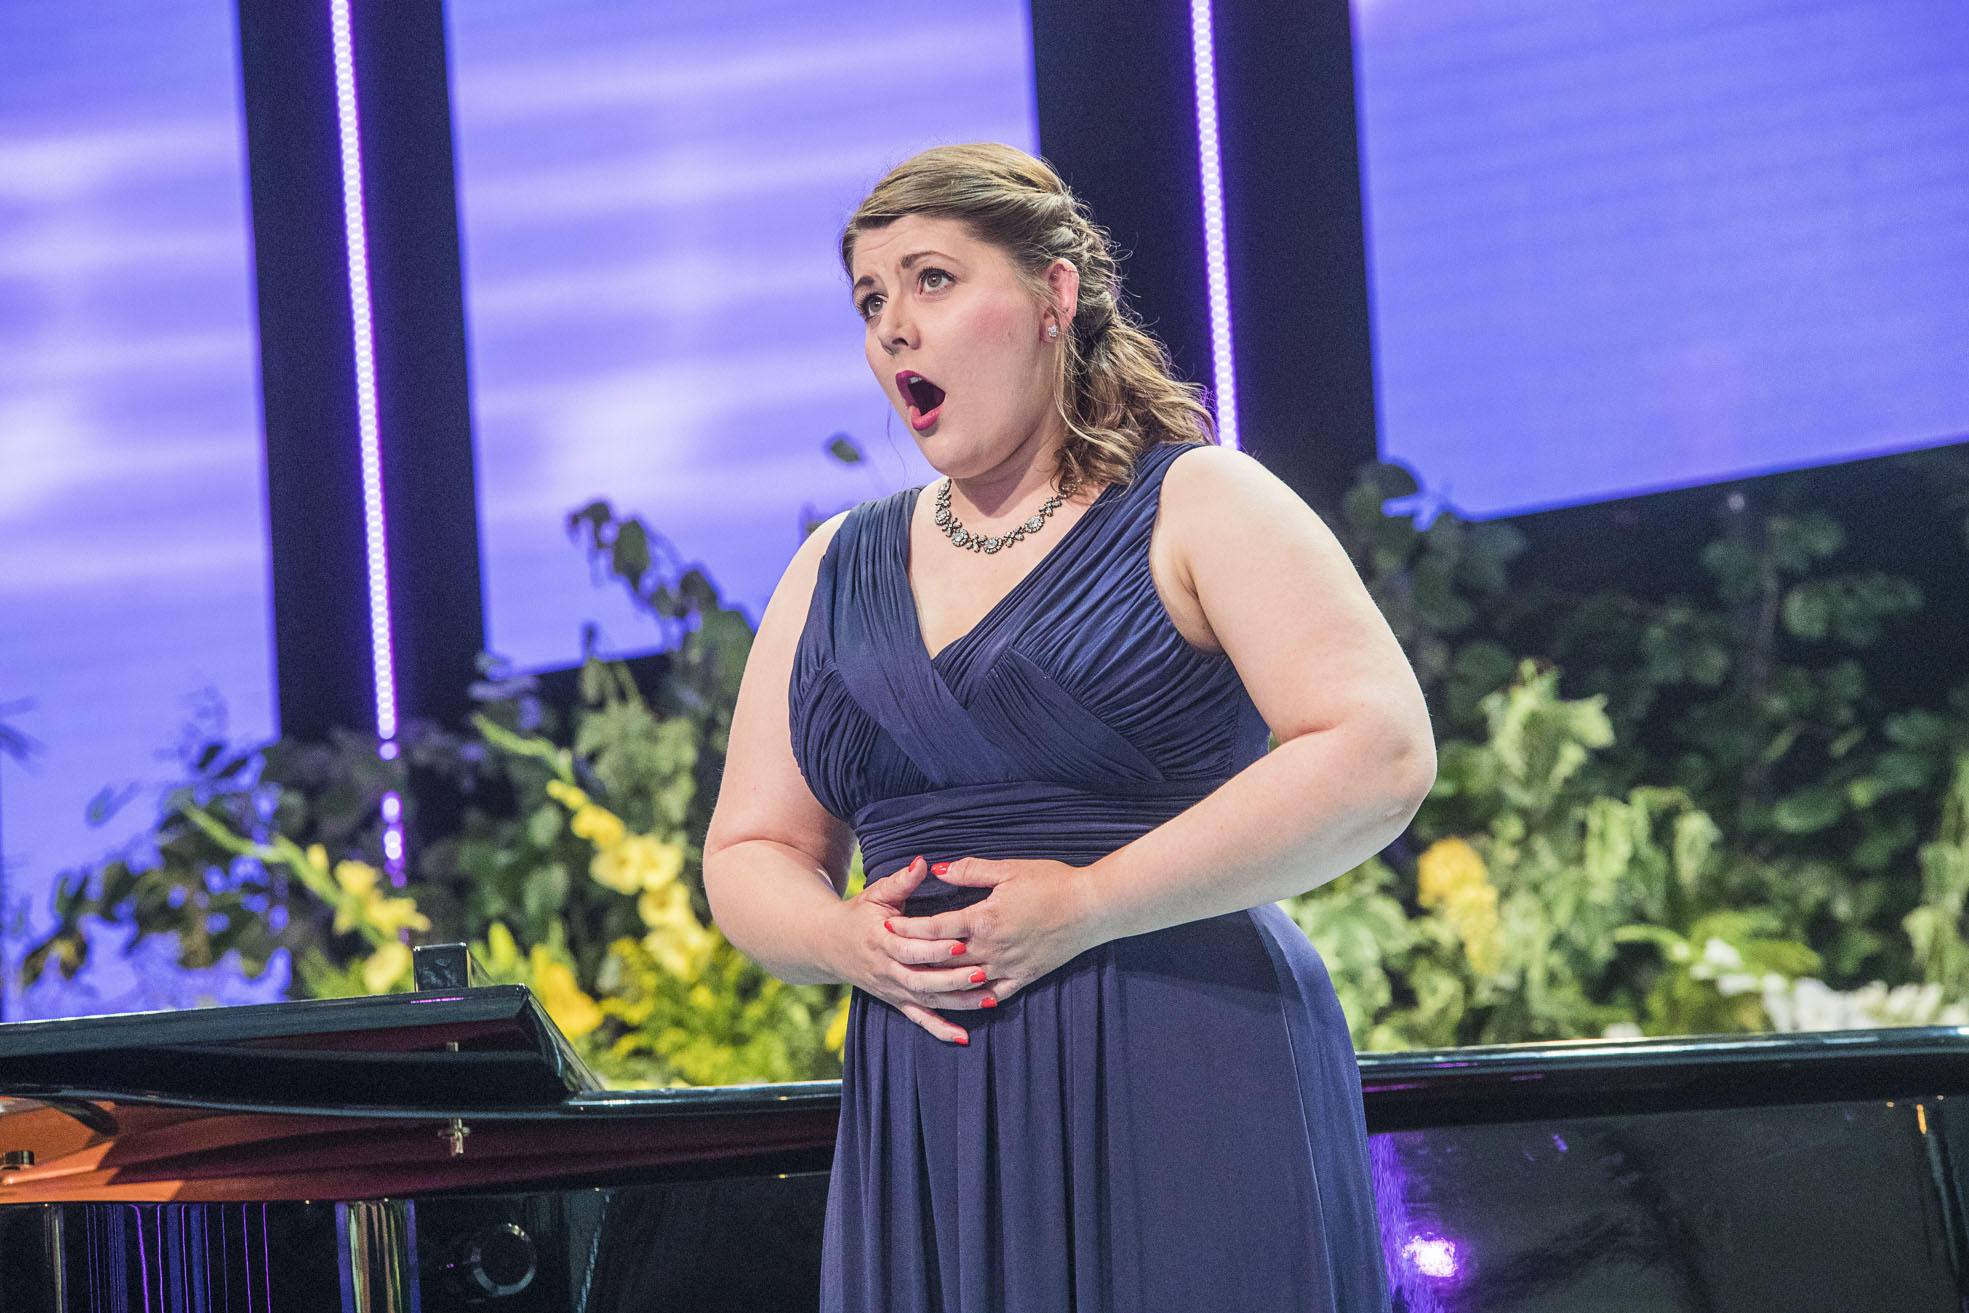 Sensational soprano Sian crowned International Voice of the Future